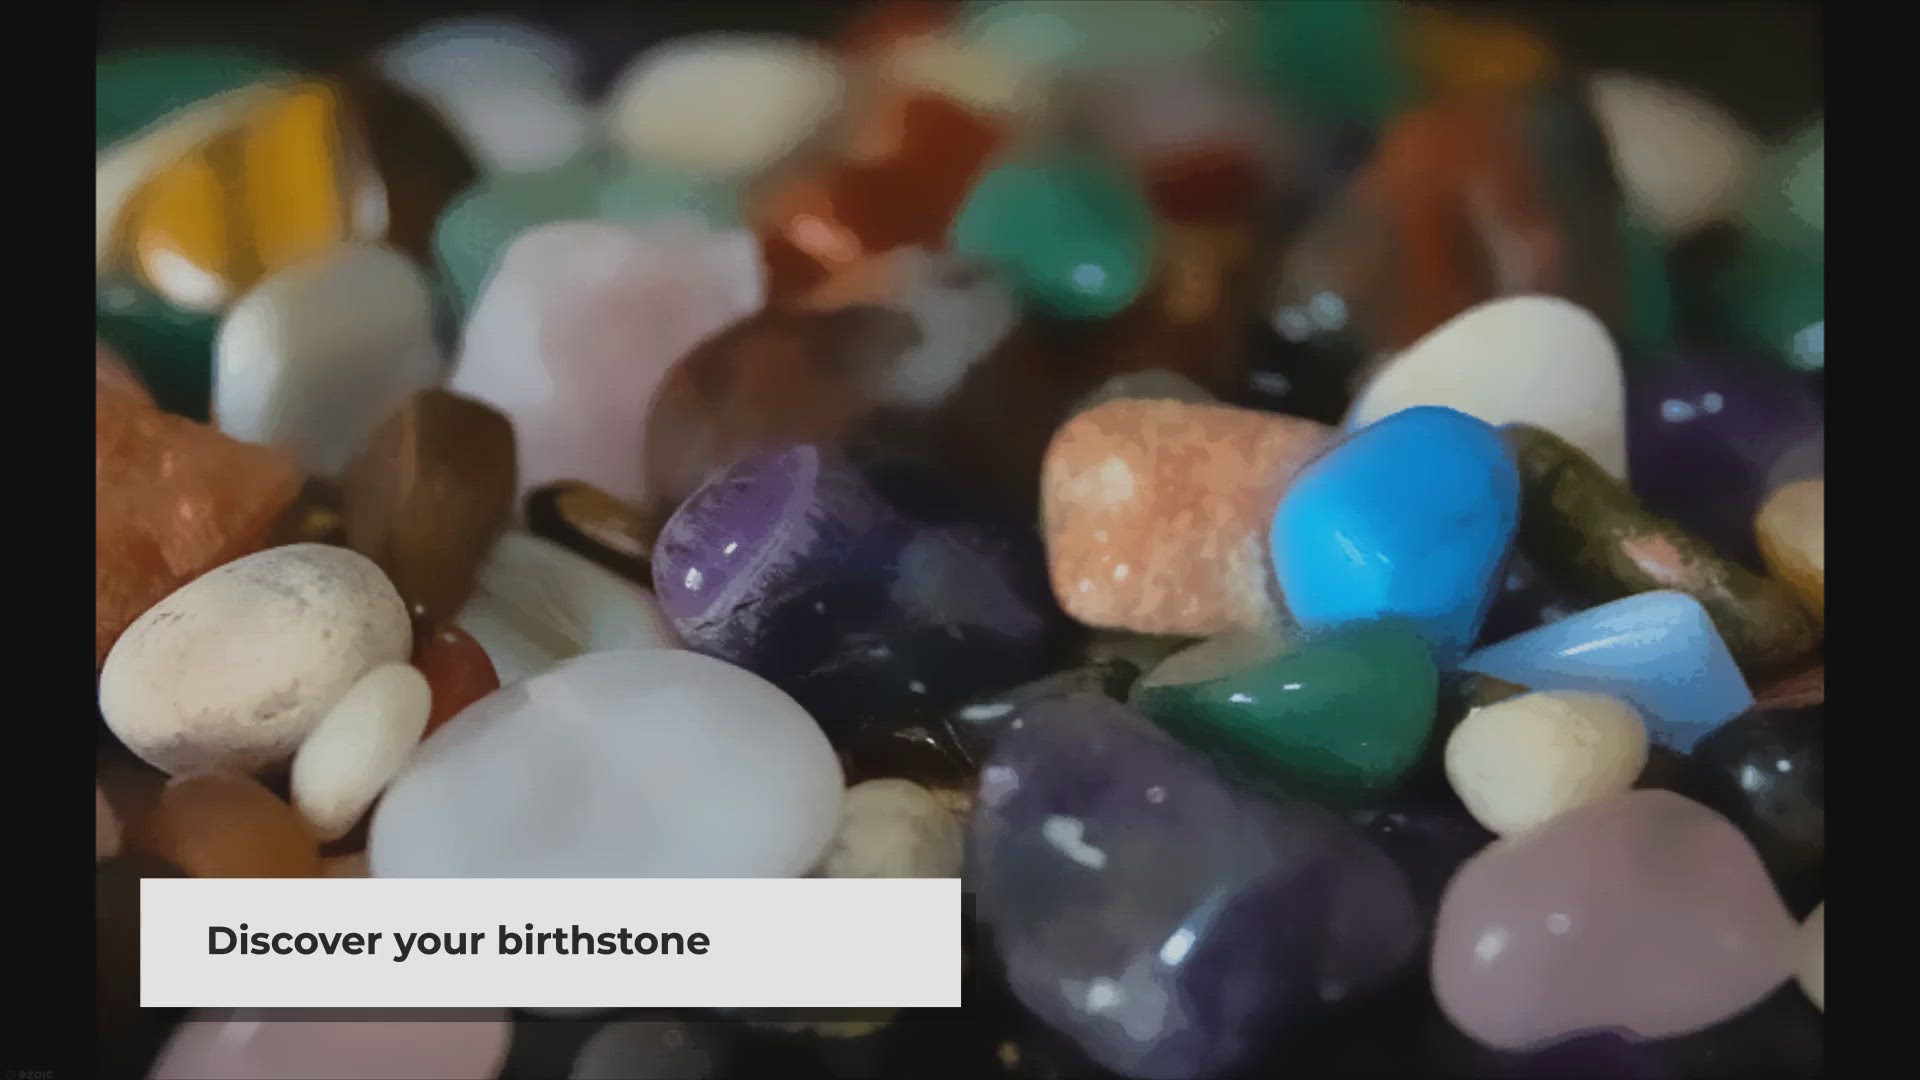 What are the Spiritual Meanings Of Gemstones and Crystals?